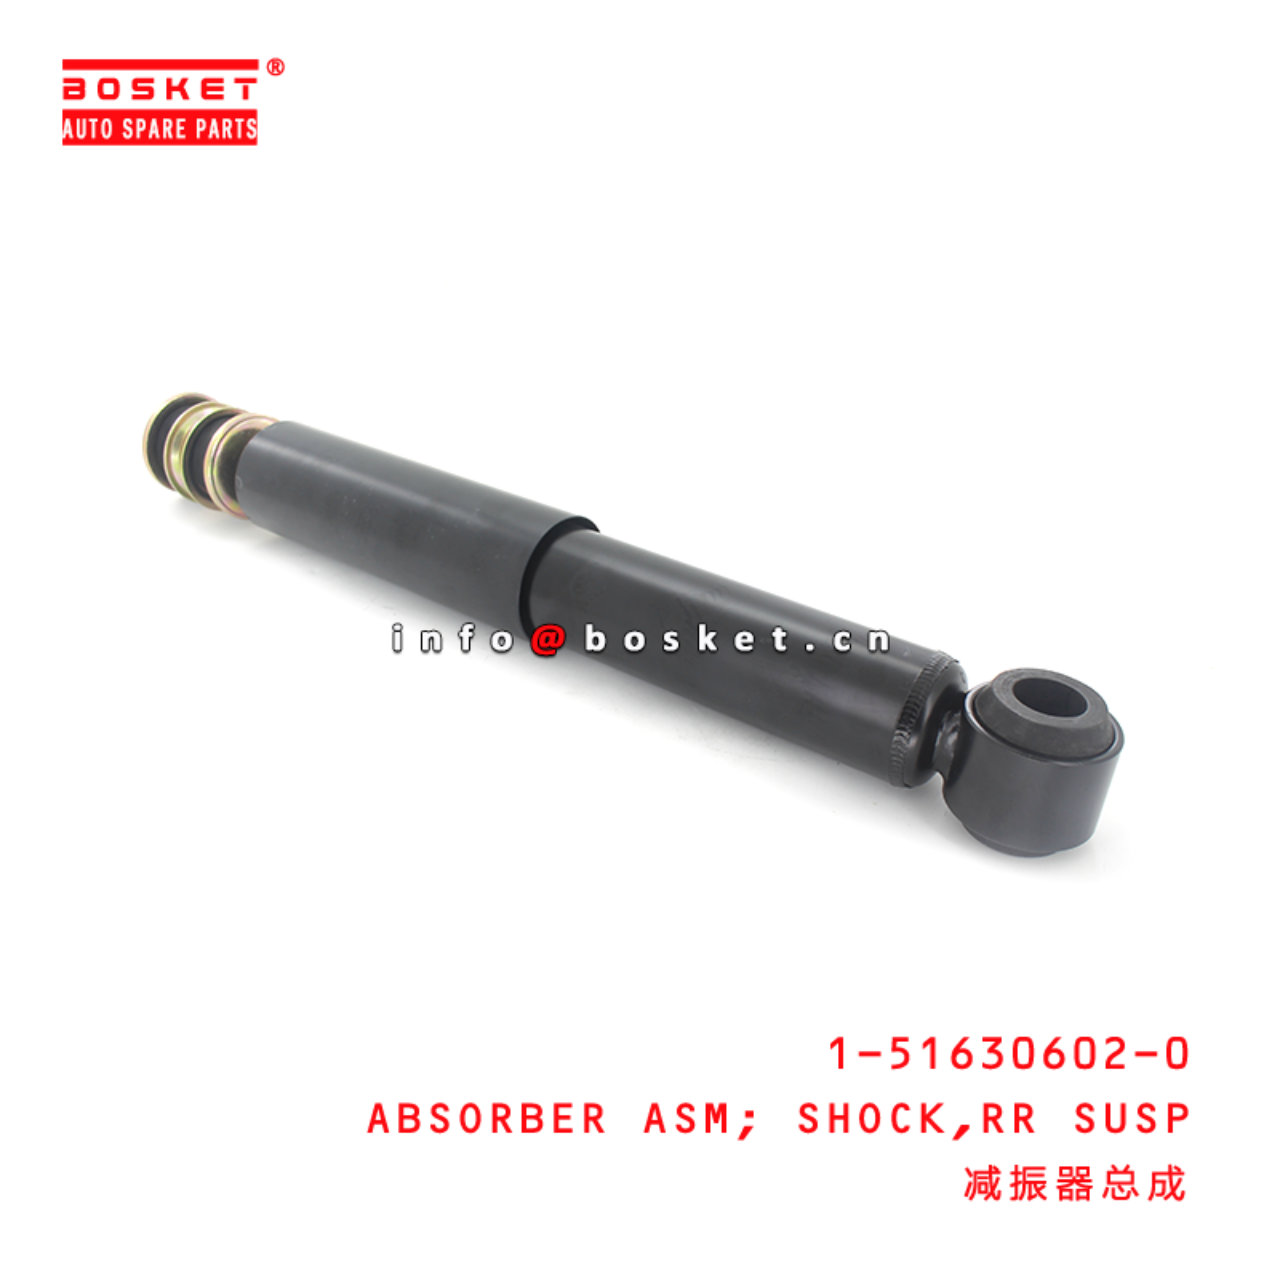 1-51630602-0 Rear Suspension Shock Absorber Assembly Suitable for 